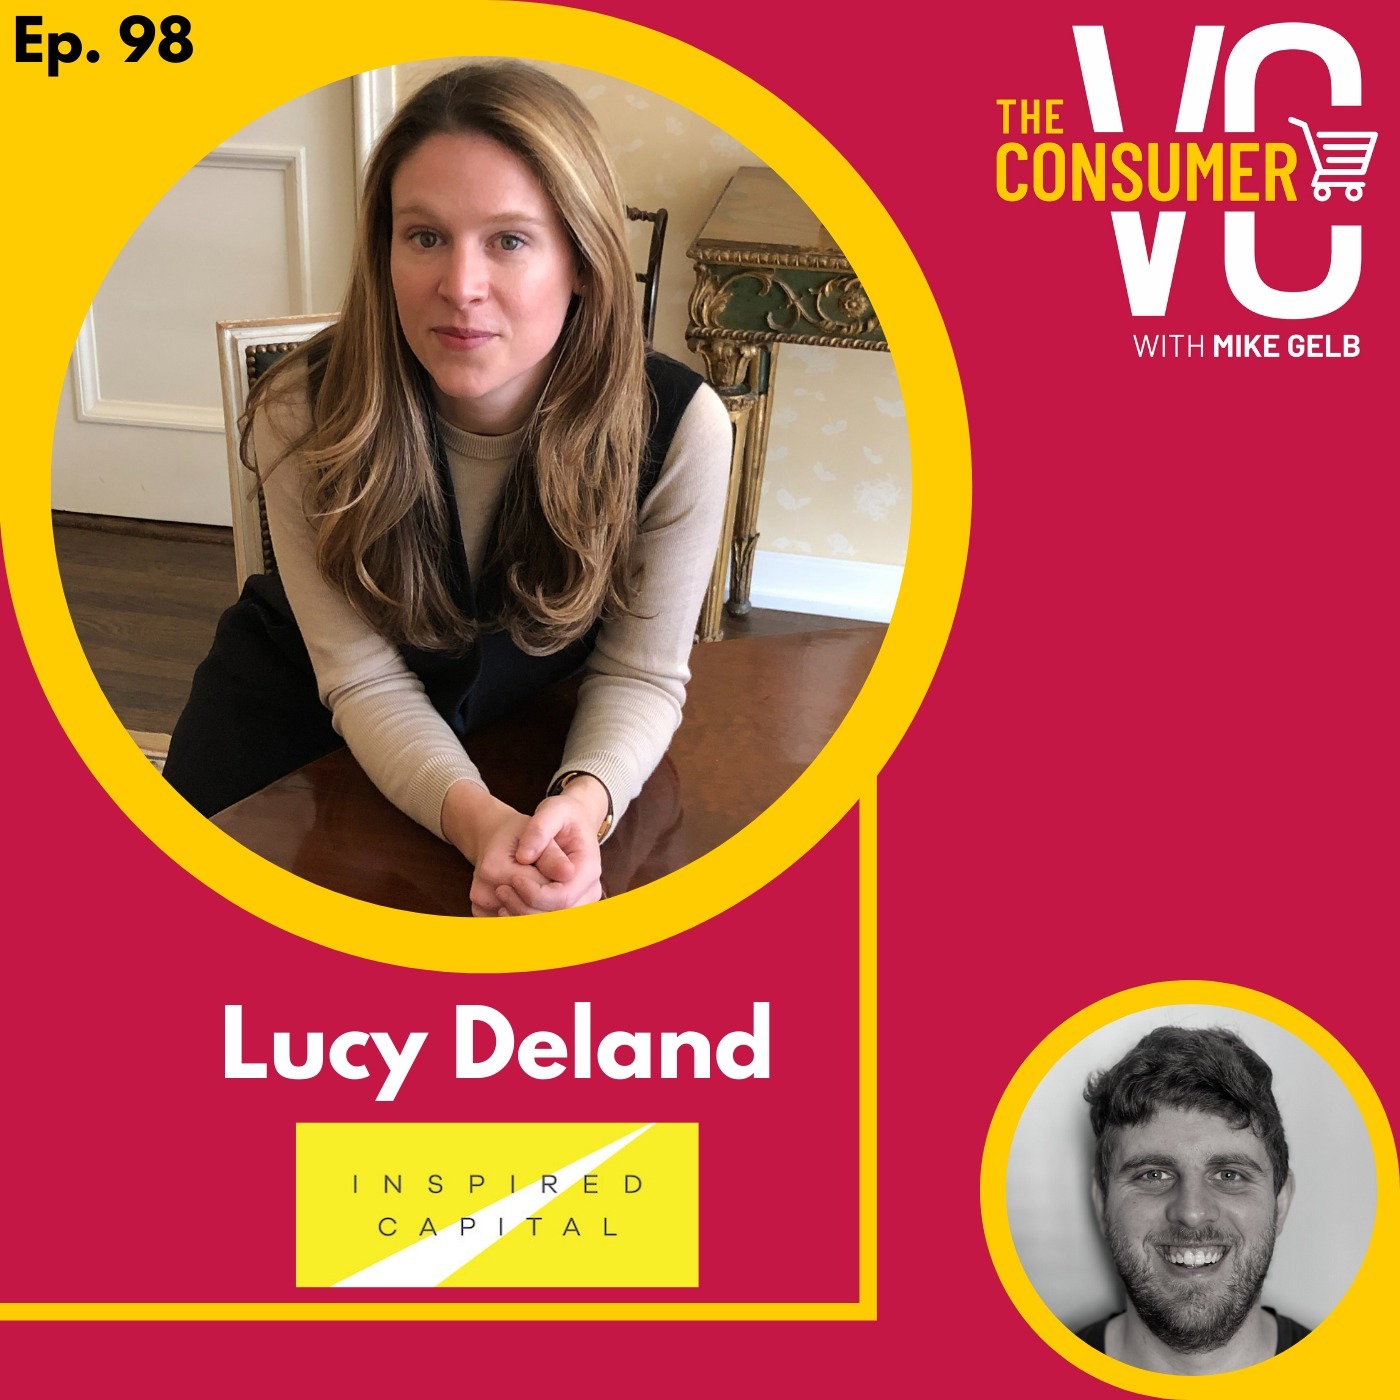 Lucy Deland (Inspired Capital) - Founding Paperless Post, How Design Became Critical To Software, and Why She's A Generalist Investor